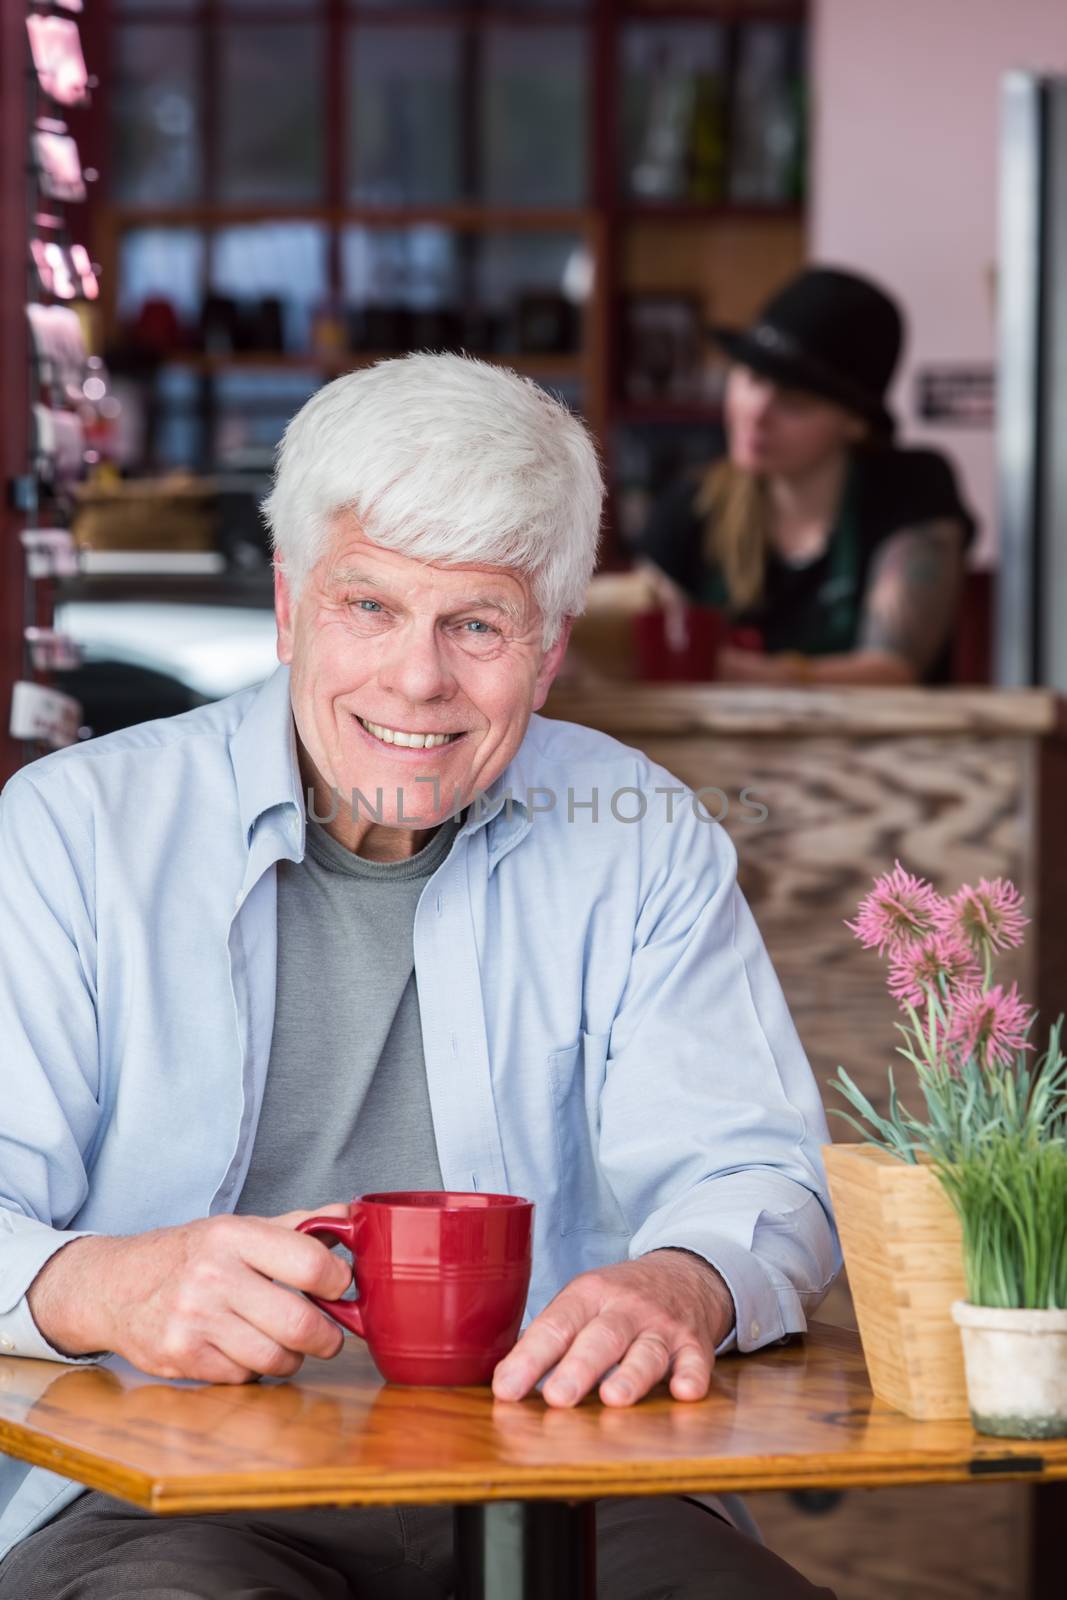 Happy senior citizen man in a coffee house with red mug